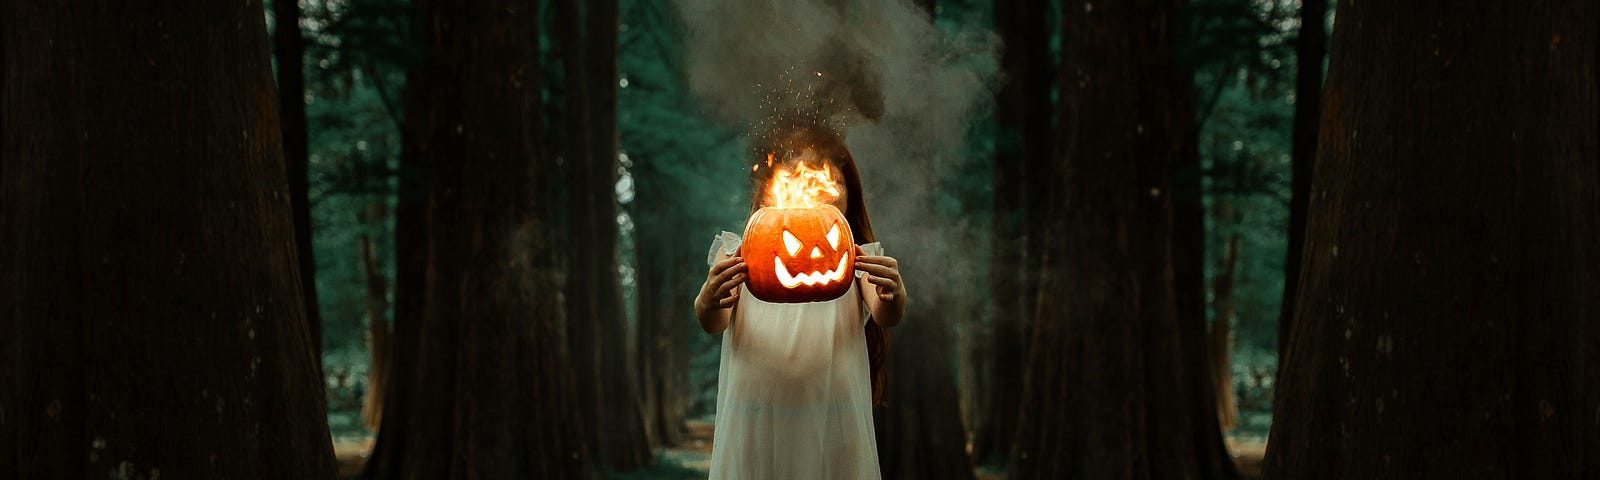 A girl wearing a white dress is standing in the middle of a forest. She’s holding a burning (carved) pumpkin in front of her face.